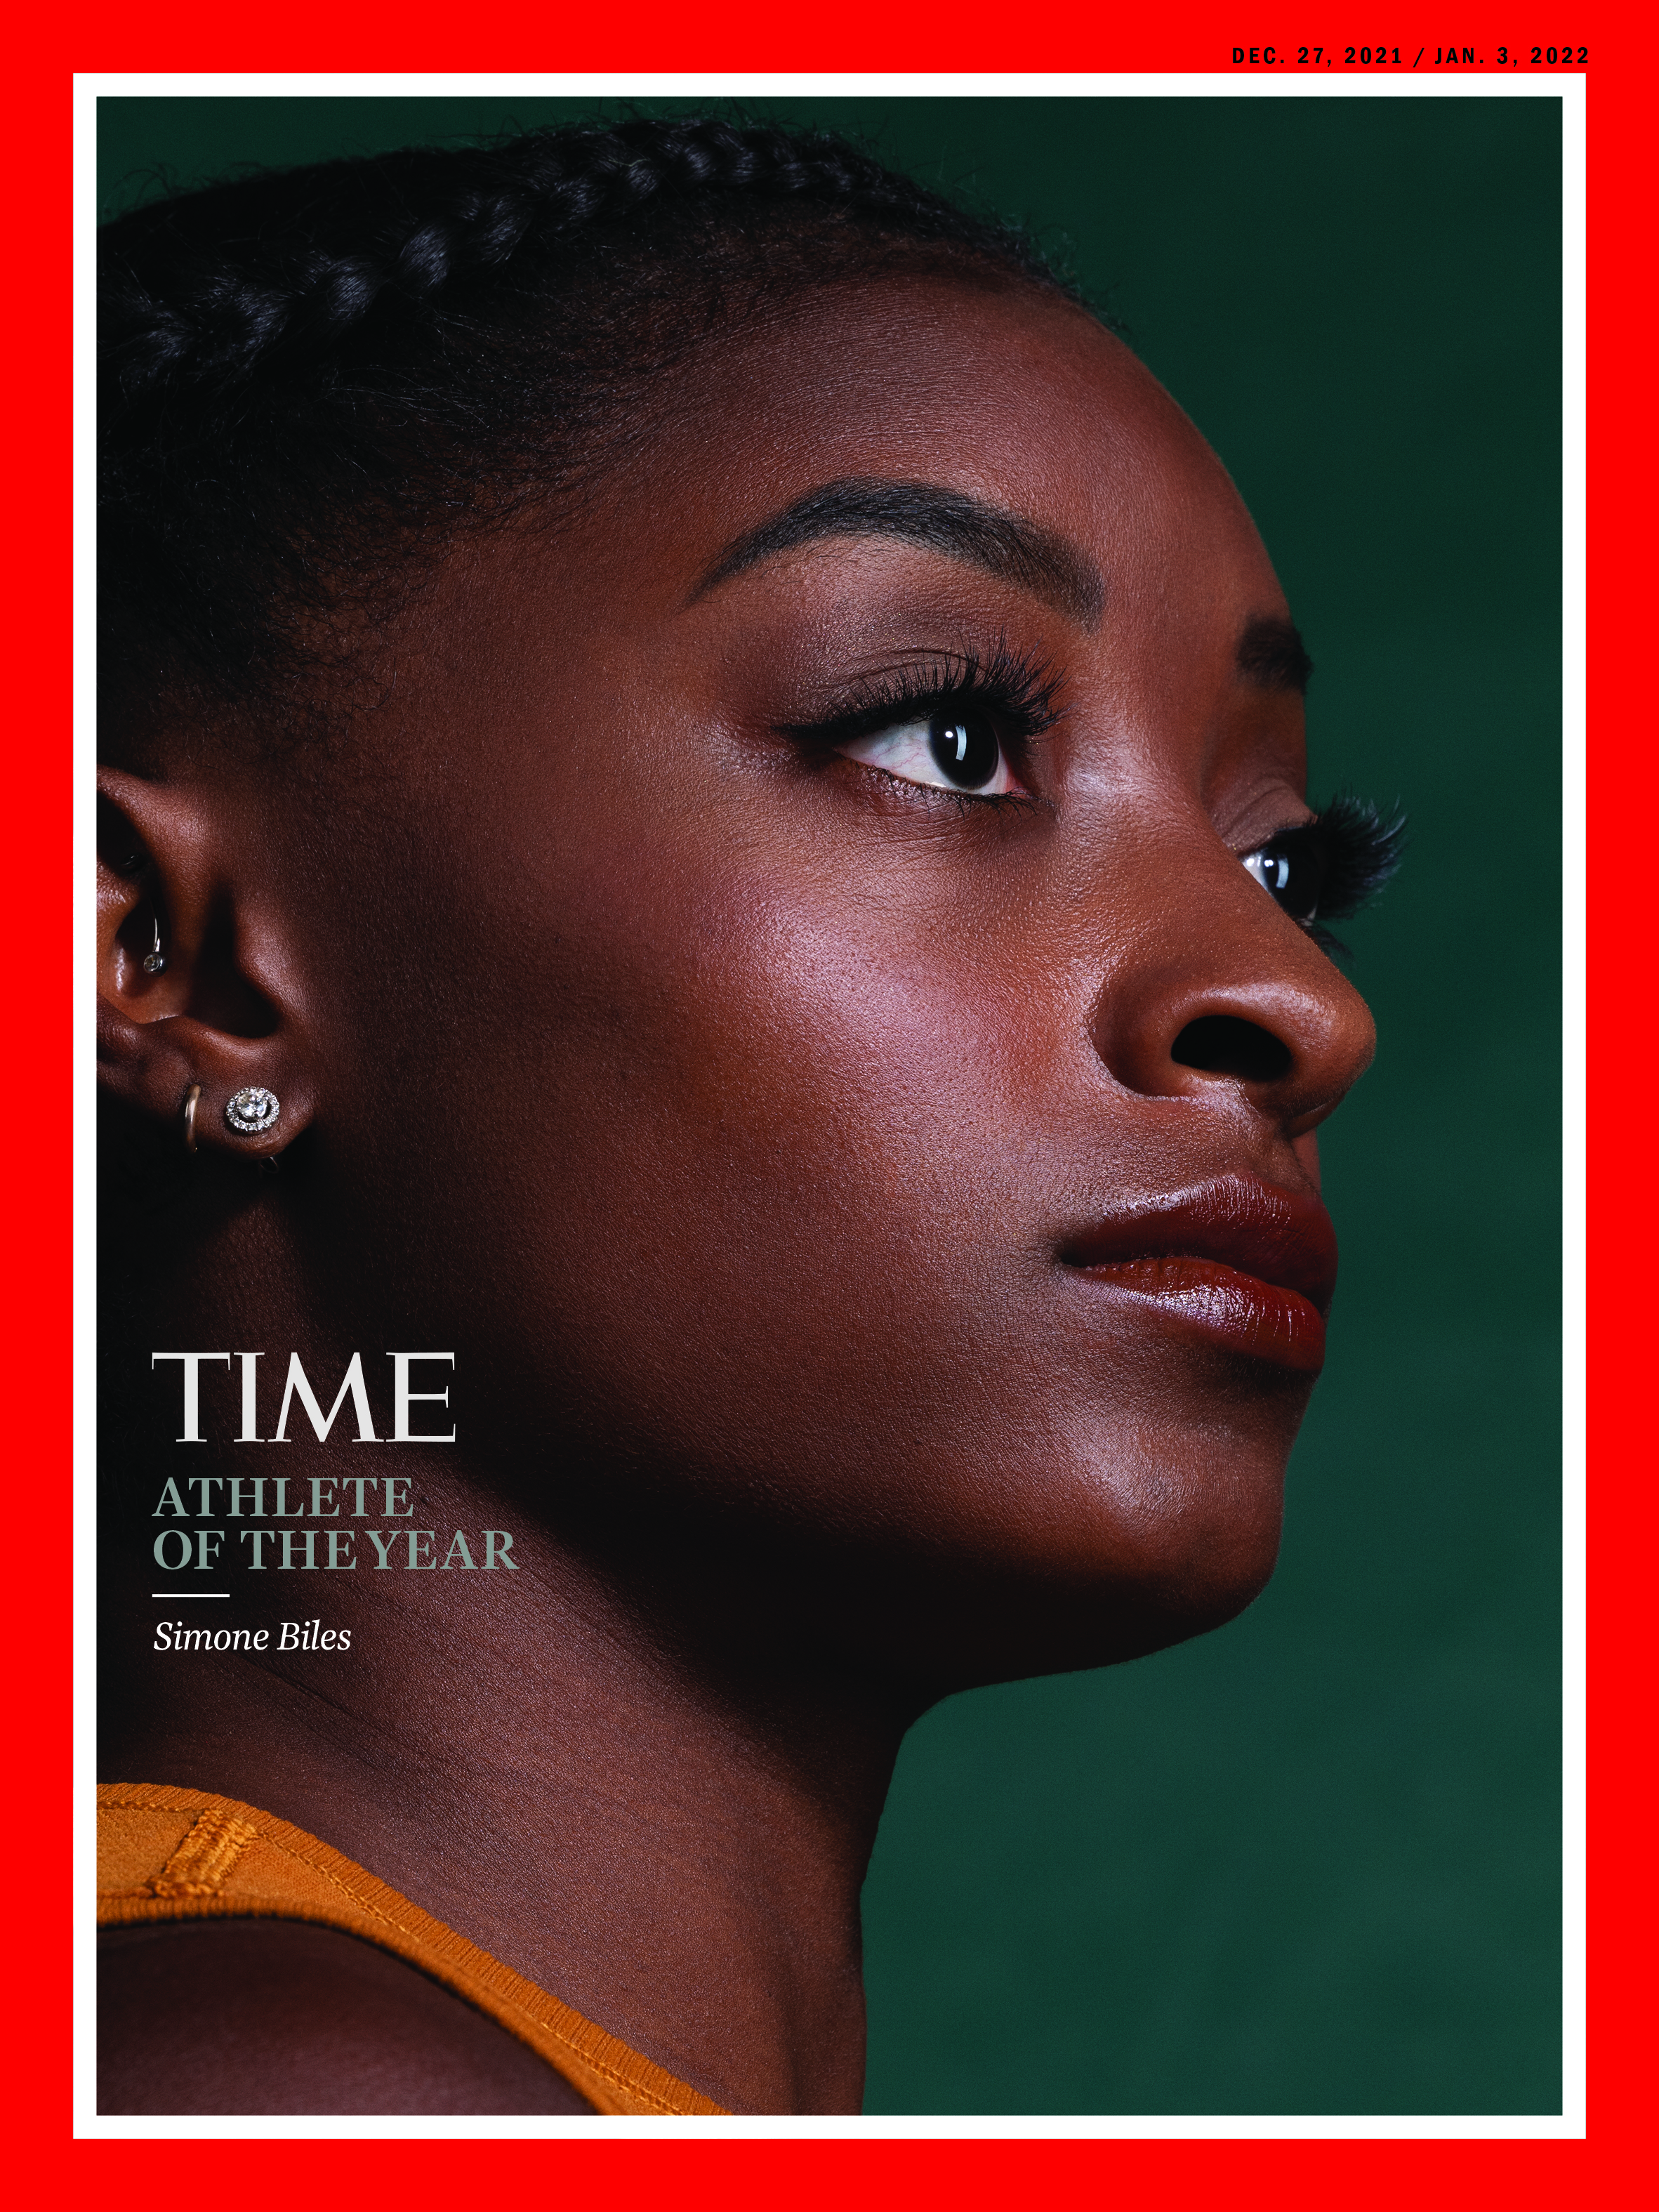 TIME - "Athlete of the Year: Simone Biles," December 27, 2021/January 3, 2022